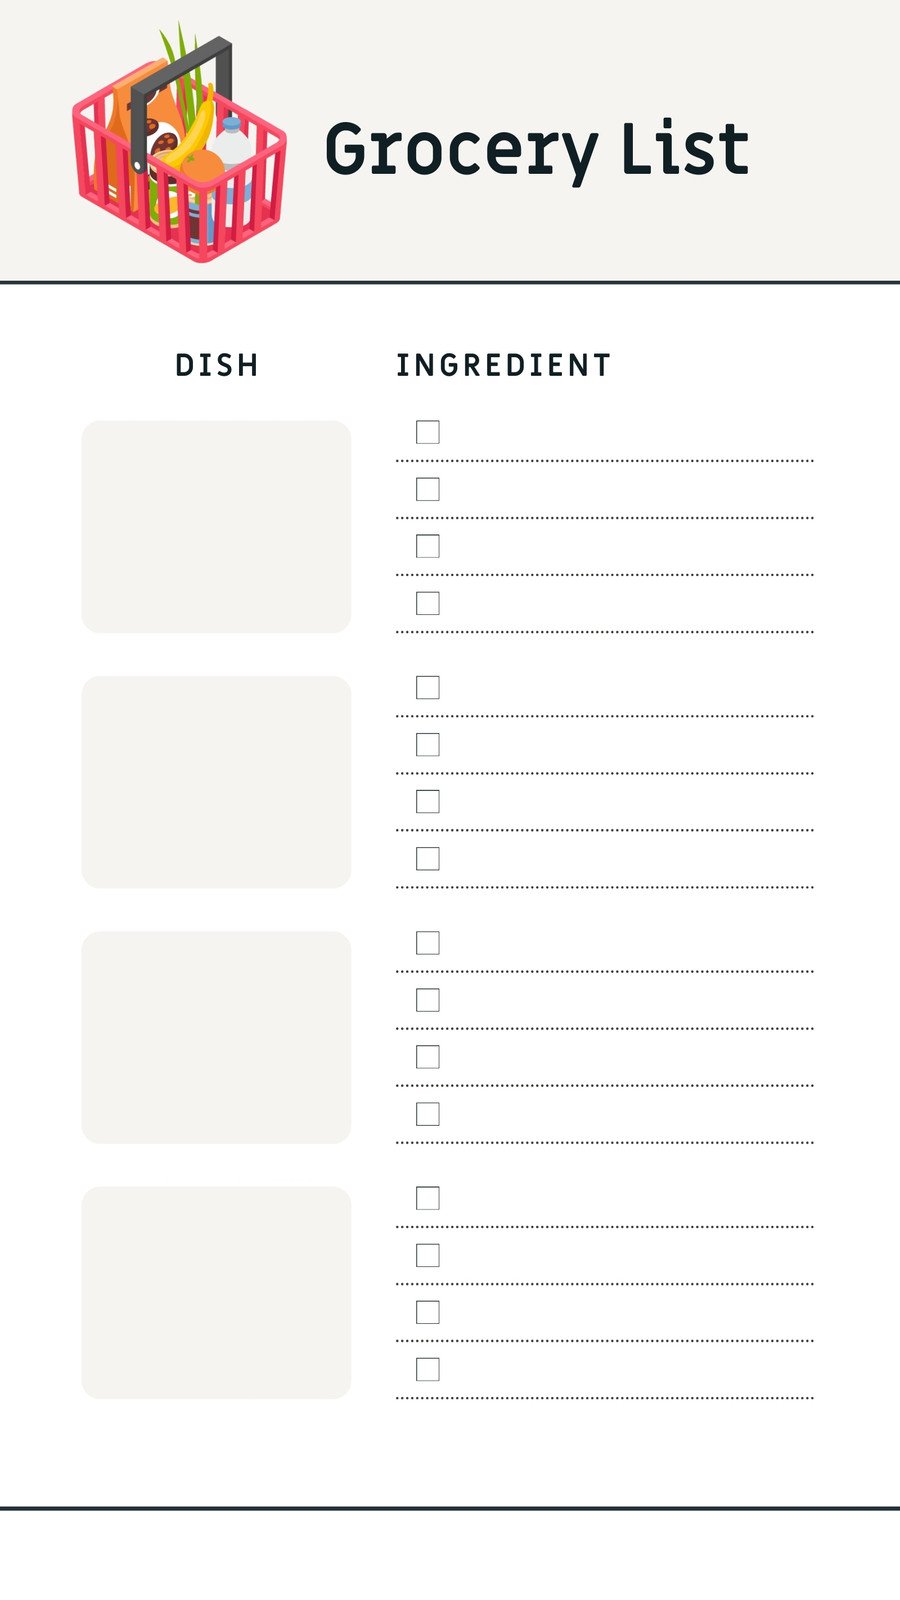 Free Printable Grocery List Templates in PDF, PNG and JPG Formats · InkPx